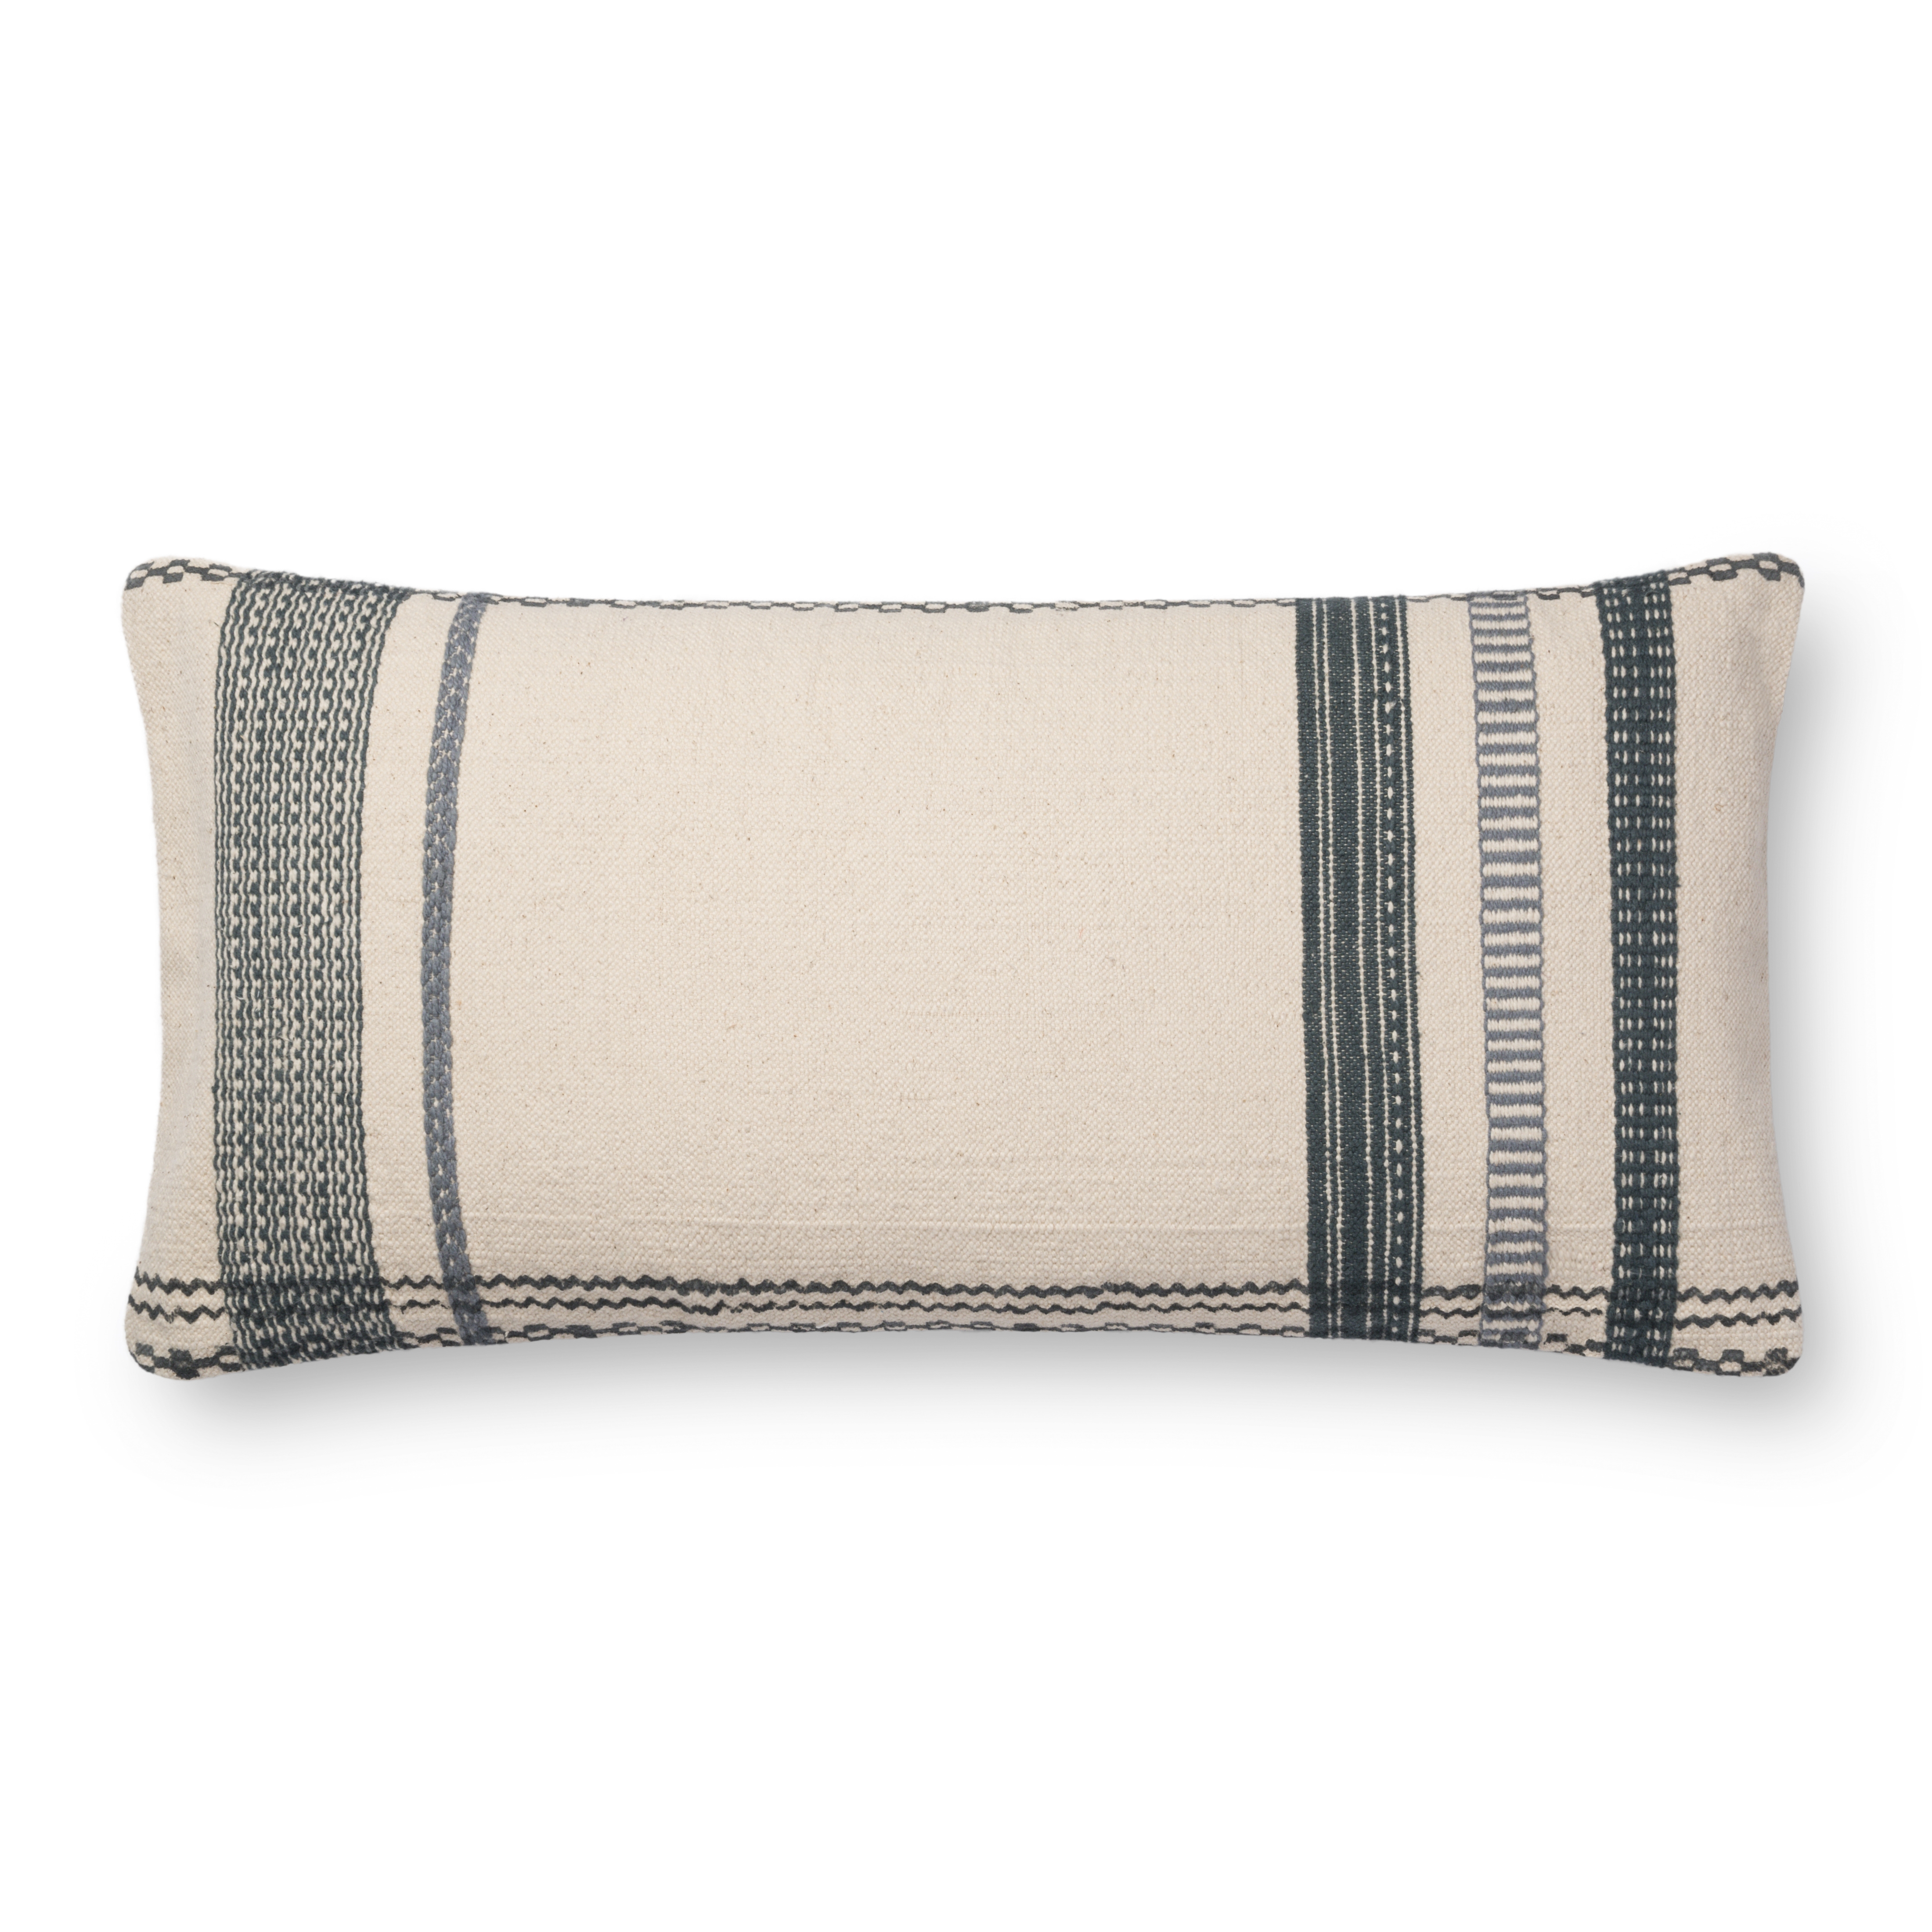 Magnolia Home by Joanna Gaines PILLOWS P1088 IVORY / BLUE 12" x 27" Cover Only - Image 0